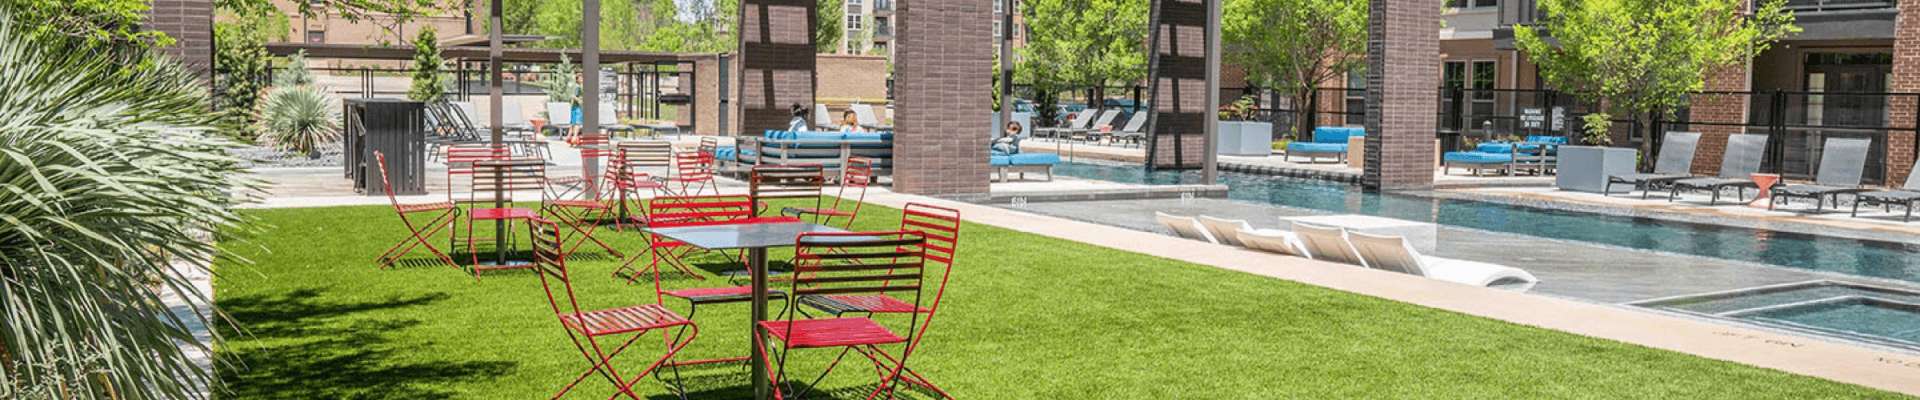 Artificial grass and relaxing chair in pool side.